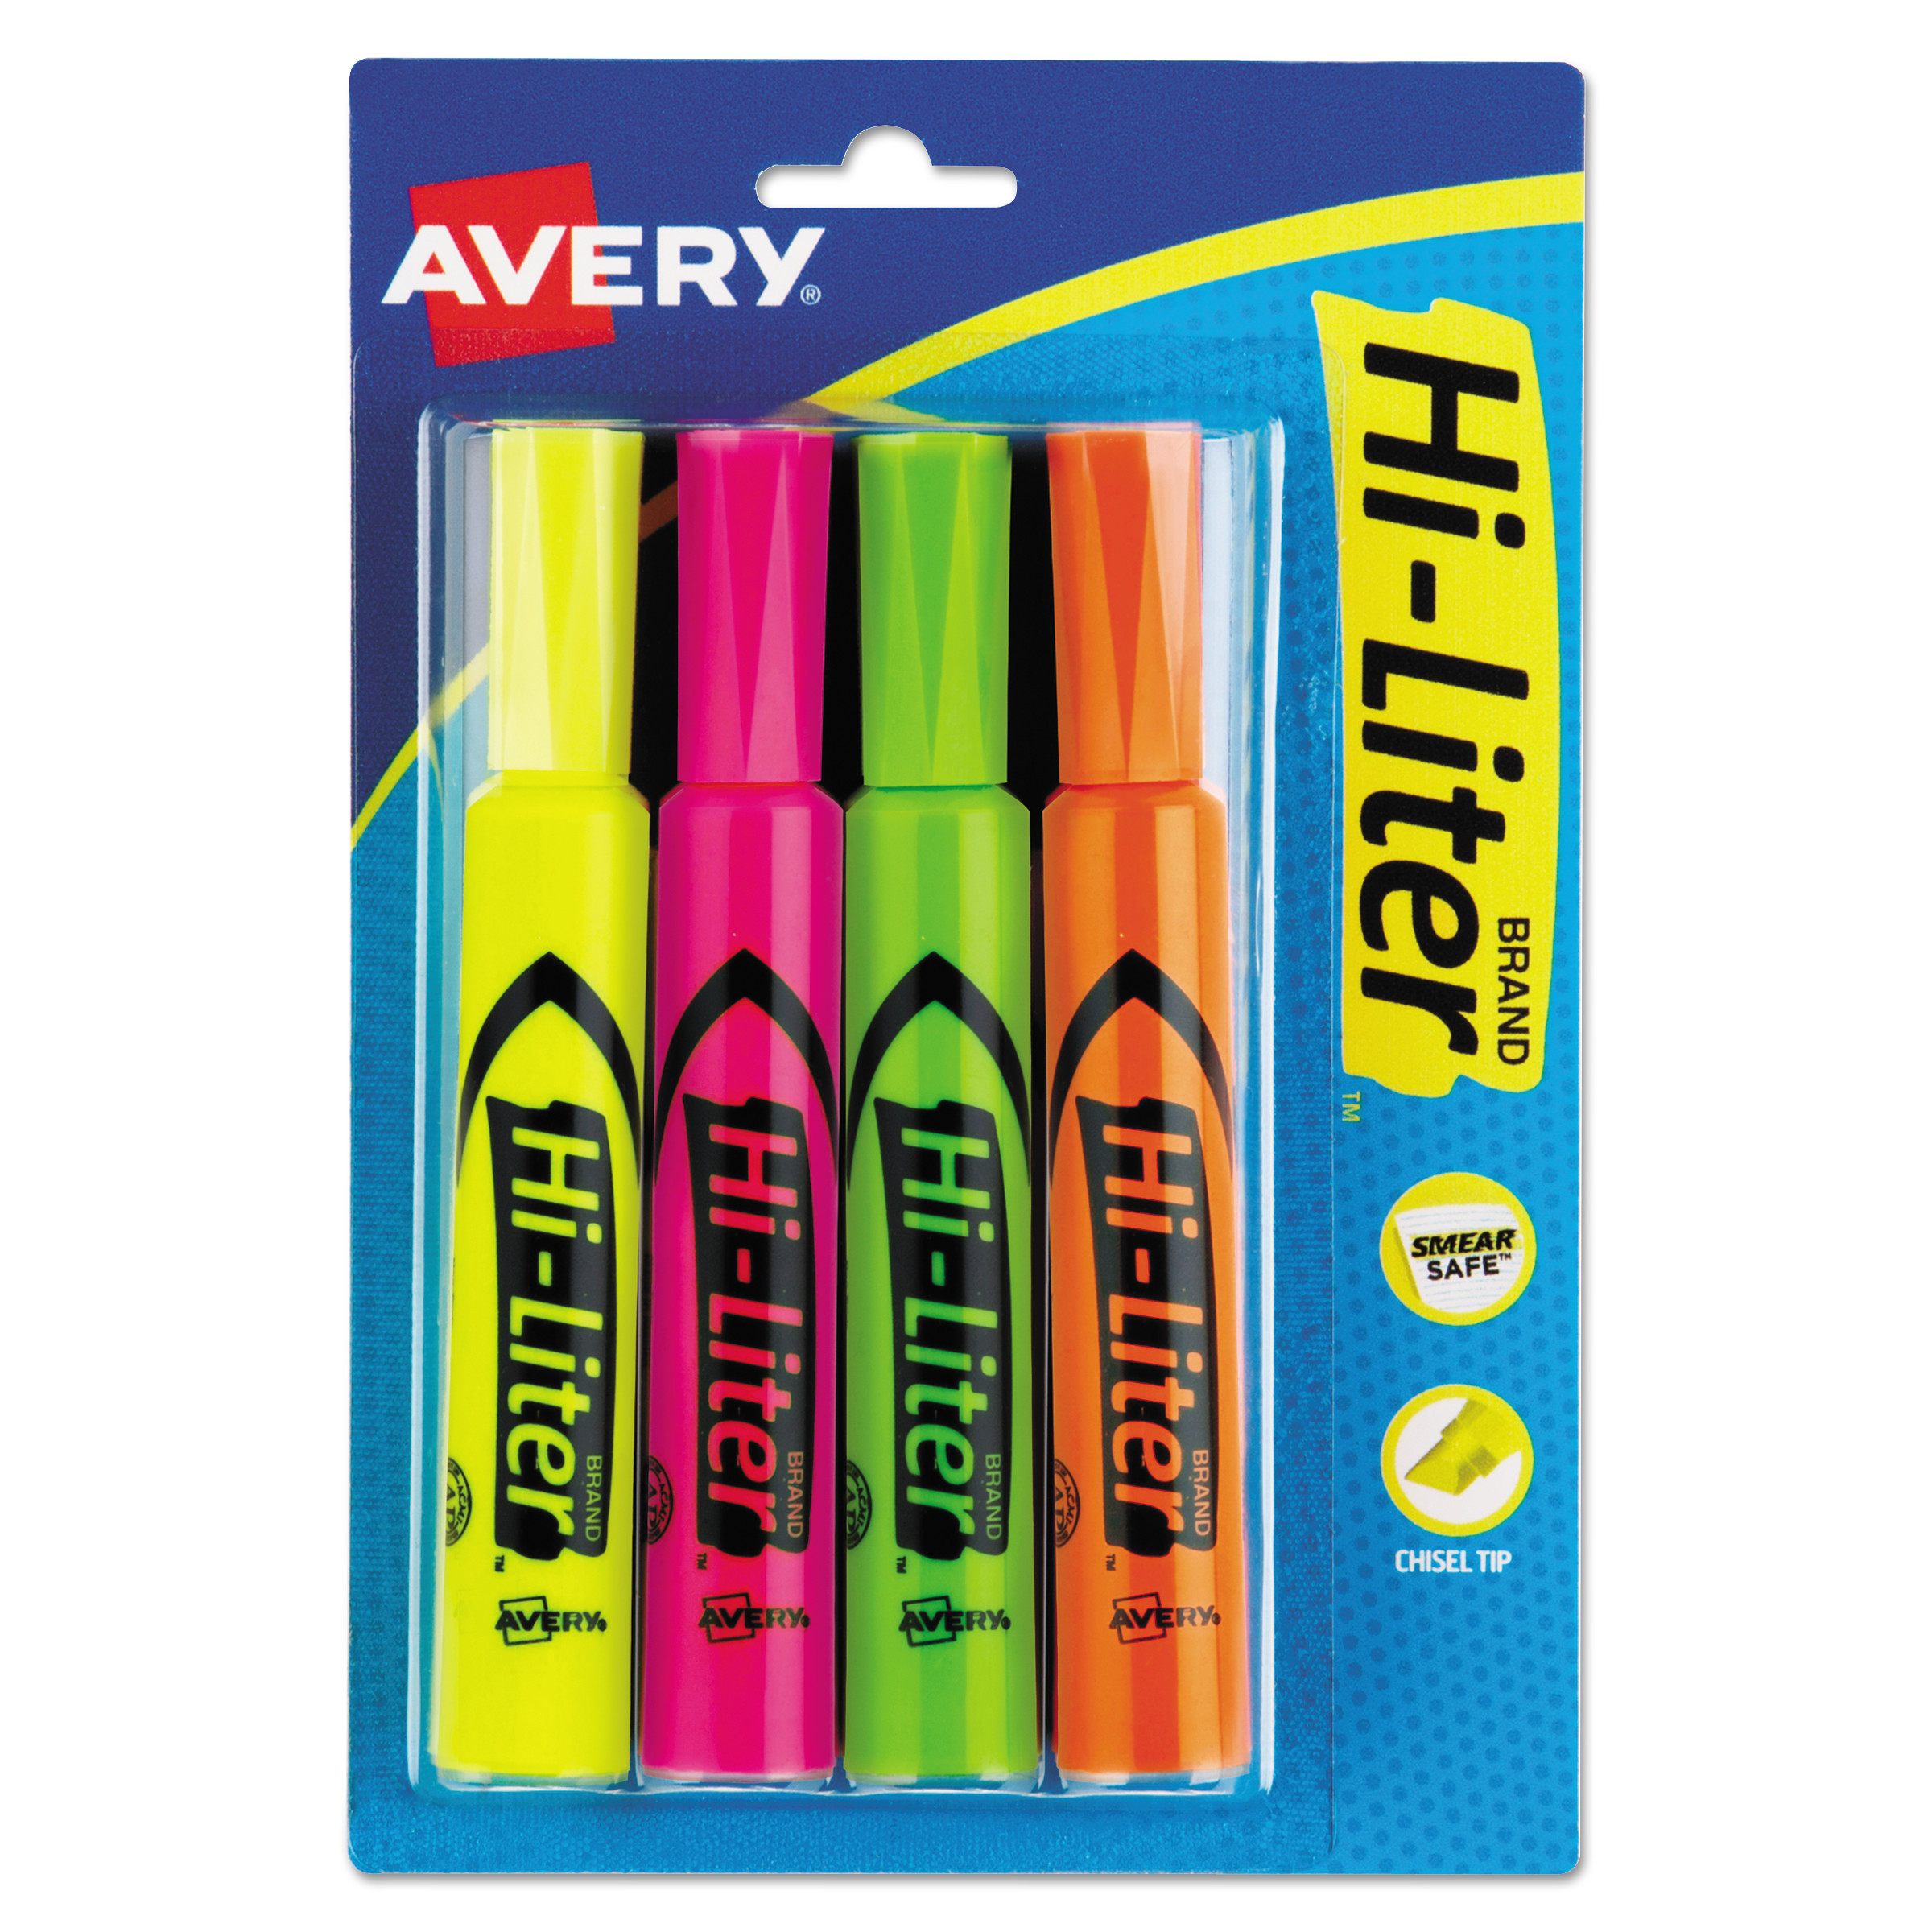 Highlighters Markers Assorted Colors Highlighter Marker Pens - Big Pack of 13 Color - Chisel Tip Fluorescent Yellow Blue Green Pink Orange and Pastel